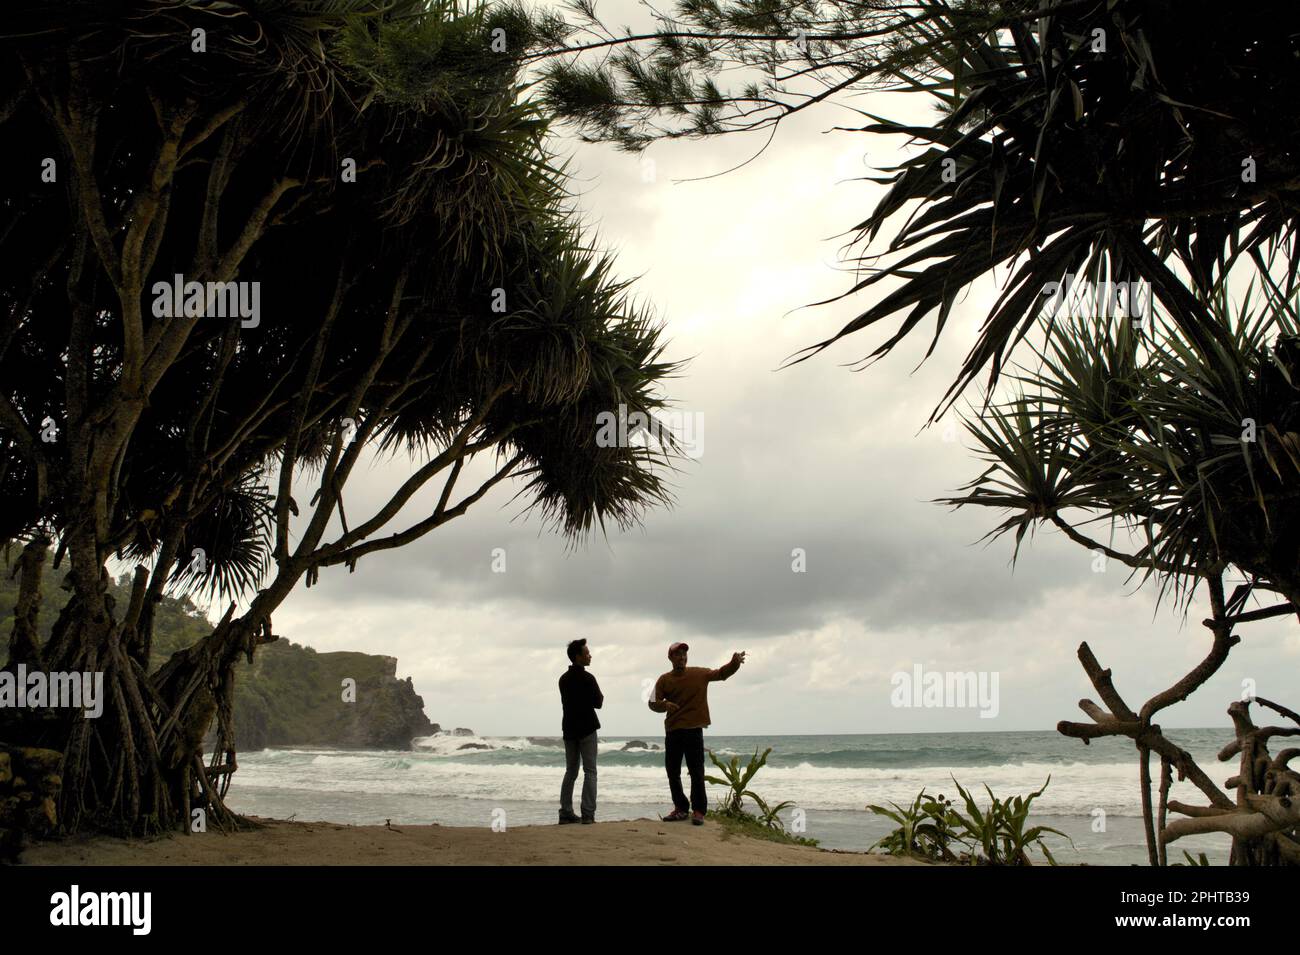 Rock climbers have a conversation as they are standing on sandy beach upon arrival, in a background of a limestone hill and Indian Ocean in a coastal area called Siung Beach, which is administratively located in Duwet, Purwodadi, Tepus, Gunungkidul, Yogyakarta, Indonesia. The beach is one of the popular coastal recreation destinations facing Indian Ocean in the special region of Yogyakarta. For rock climbing enthusiasts, Siung Beach offers more than 200 sport routes that are already established on the face of its limestone hills. Stock Photo